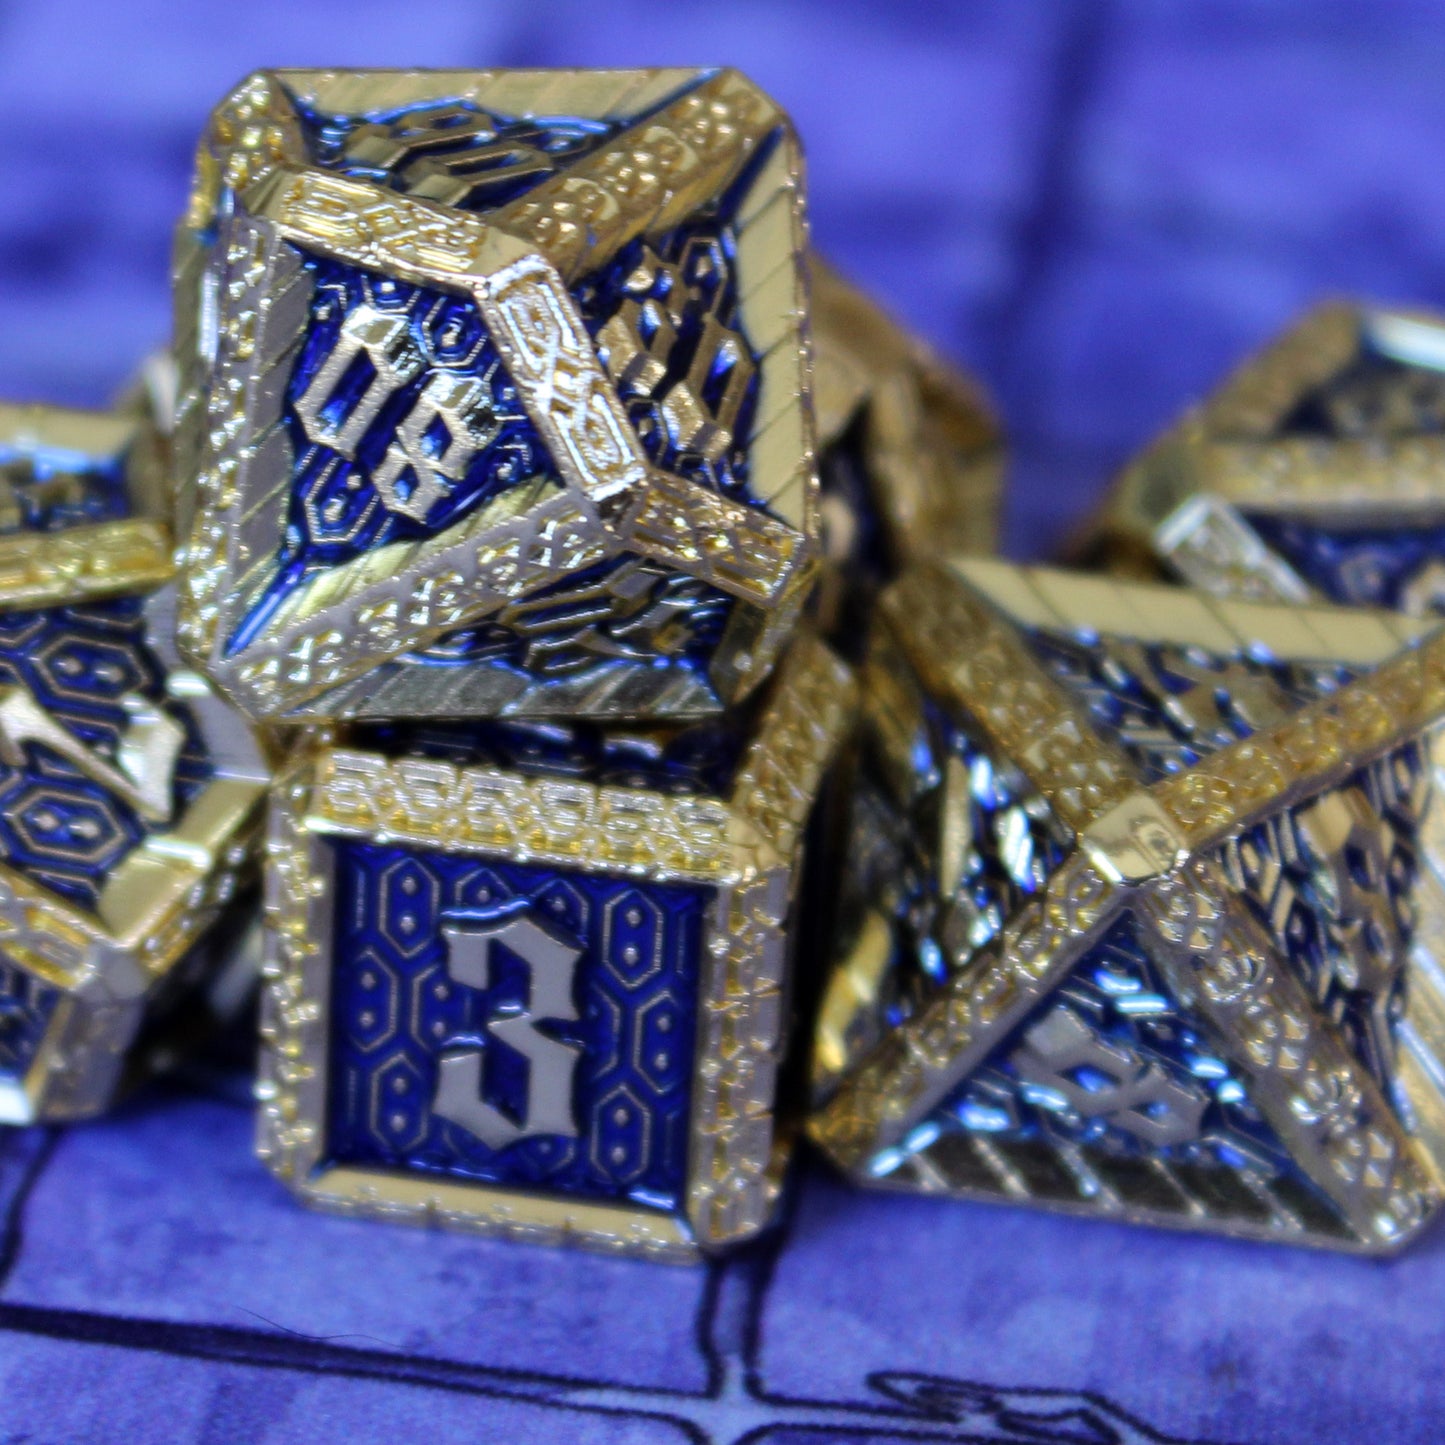 Metal Cavalier Gold & Blue Dice Set with Display Box